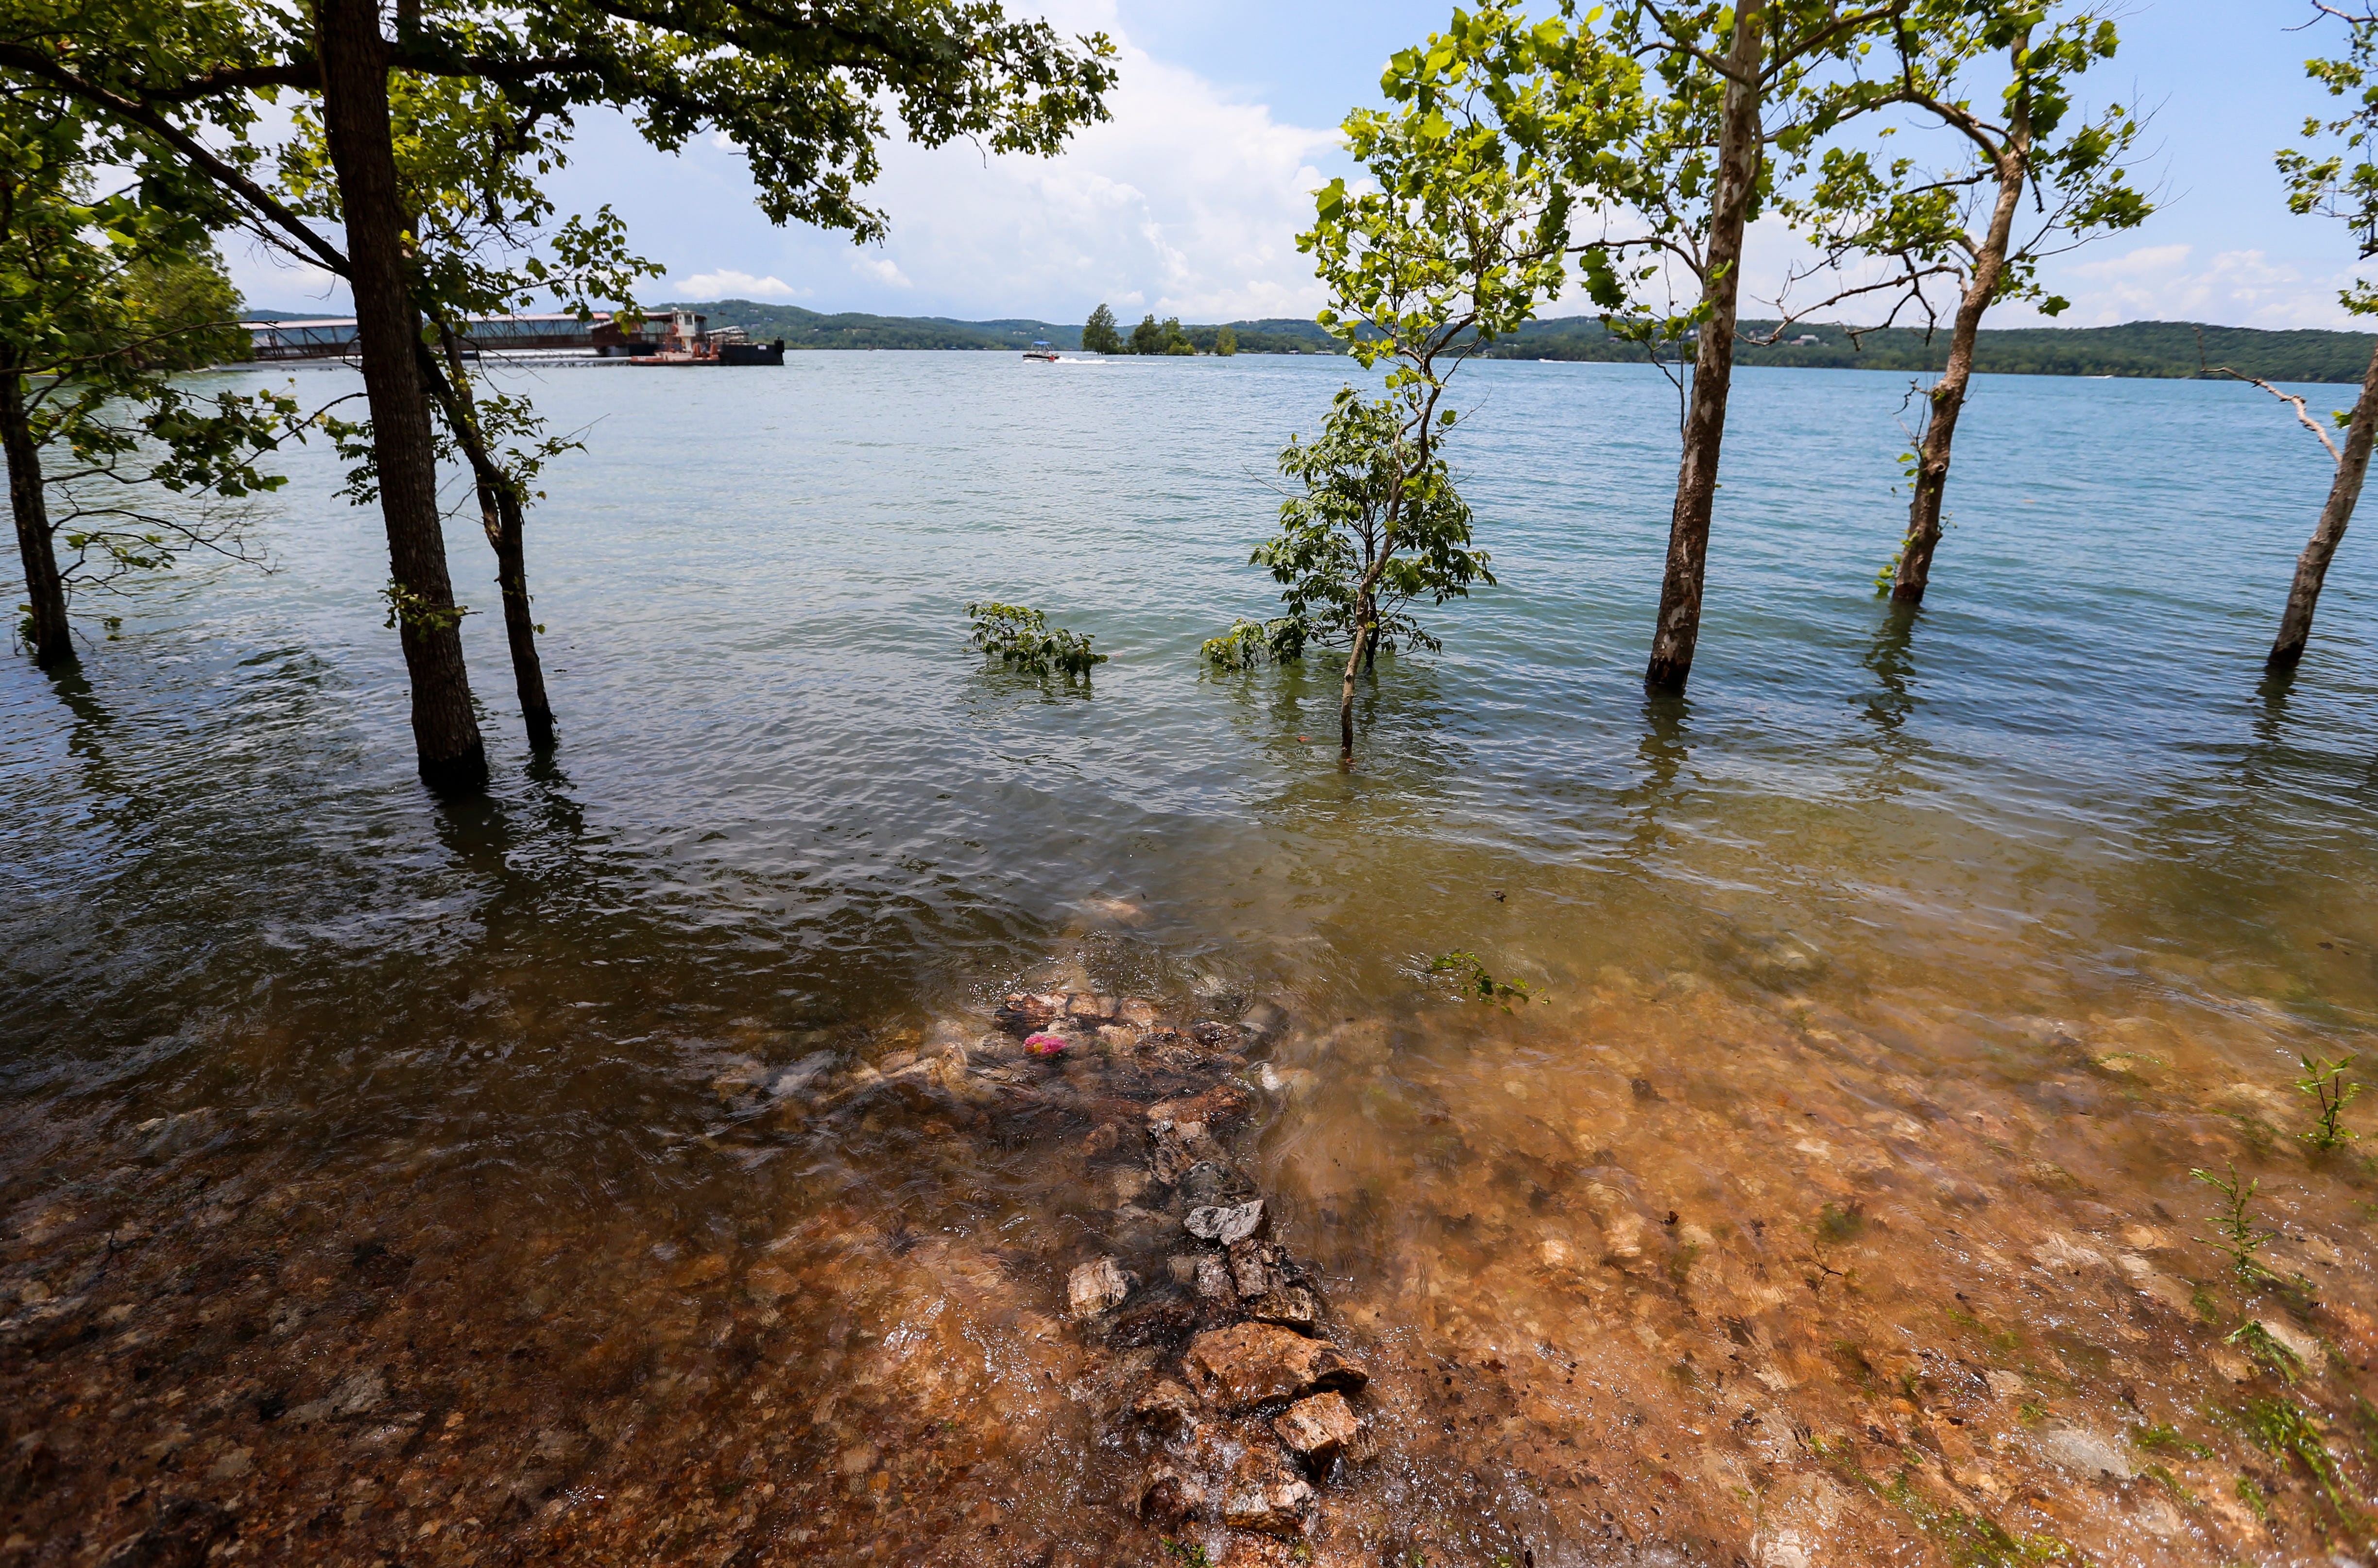 A cross made from rock is submerged in Table Rock Lake's waters near where Stretch Duck 7 sank, killing 17 people on July 19 of last year.